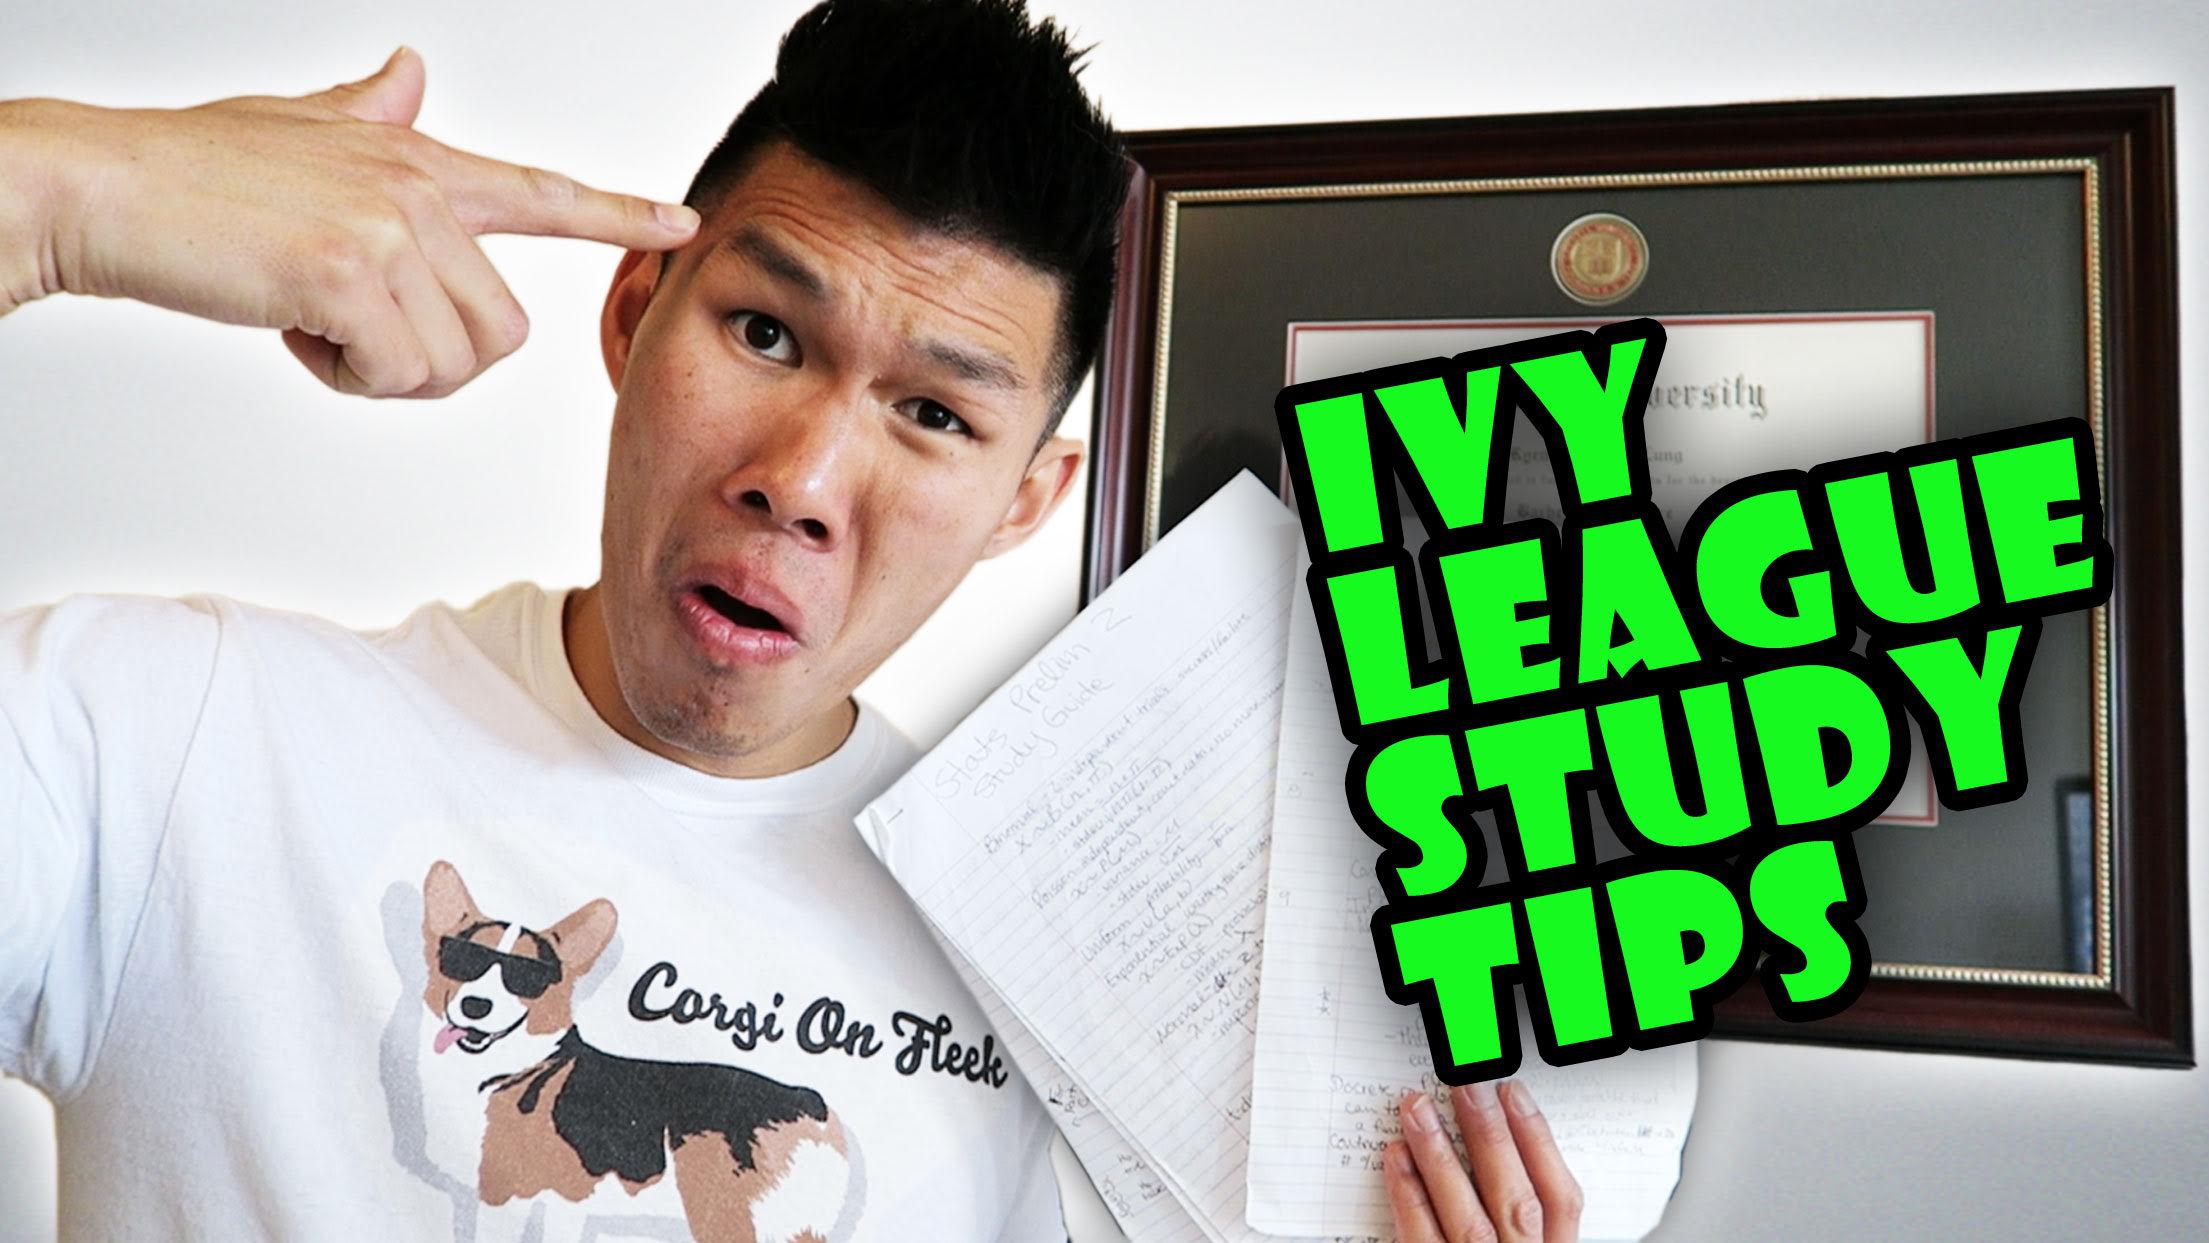 HOW TO STUDY | TIPS FROM AN IVY LEAGUE STUDENT